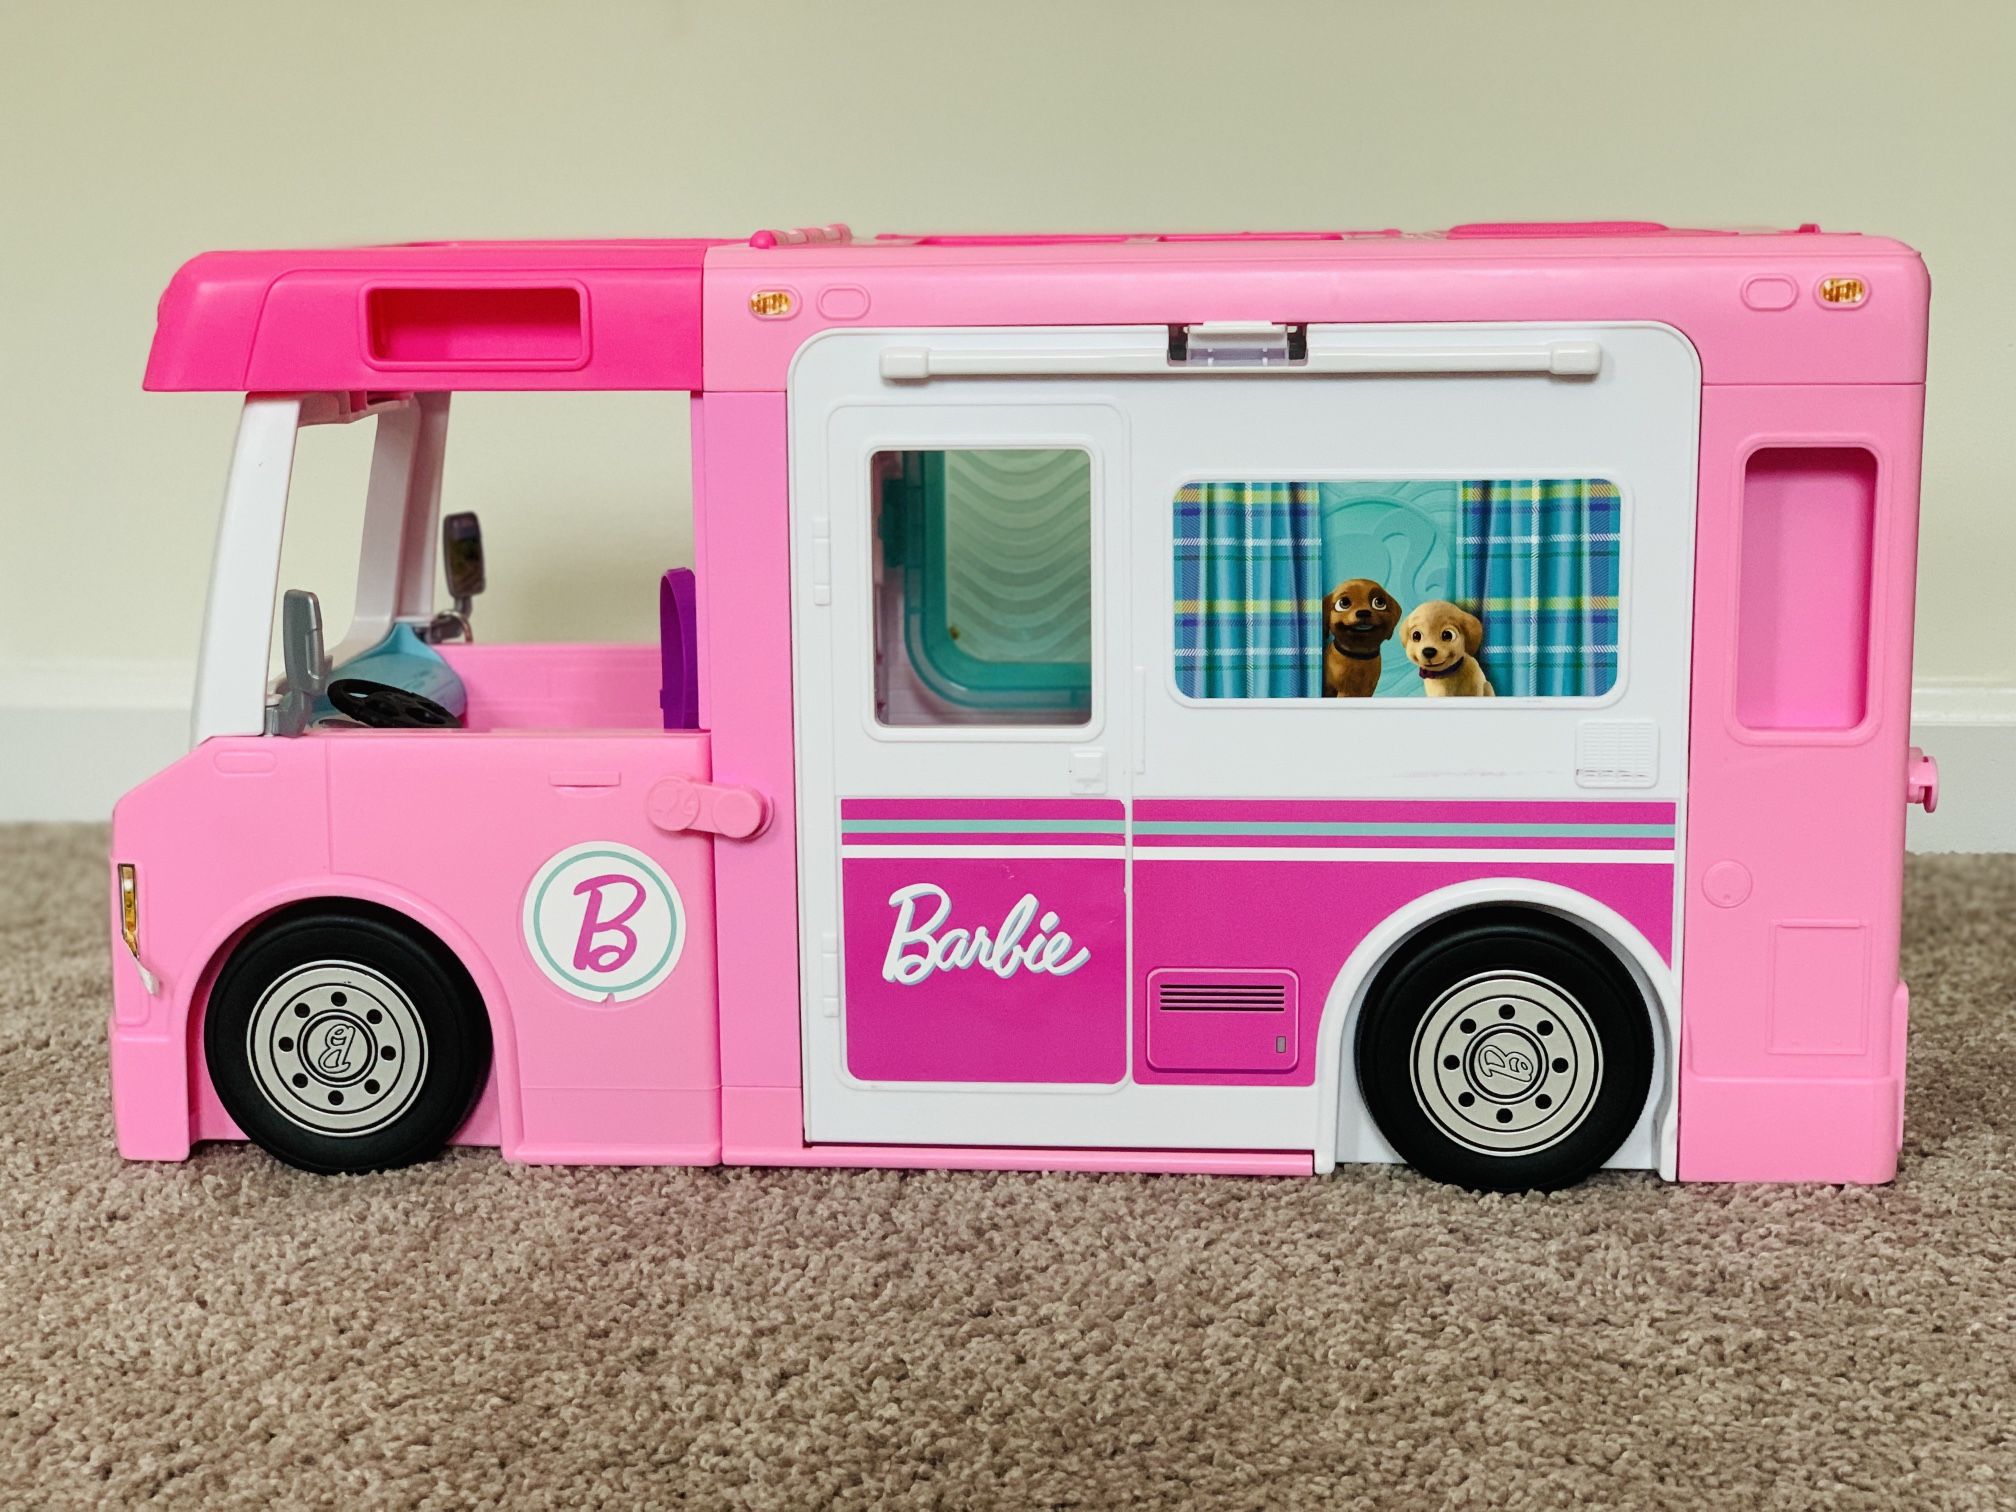 Barbie 3-in-1 DreamCamper Vehicle, approx. 3-ft, Transforming Camper with Pool, Truck, Boat and 50 Accessories, Makes a Great Gift for 3 to 7 Year Old